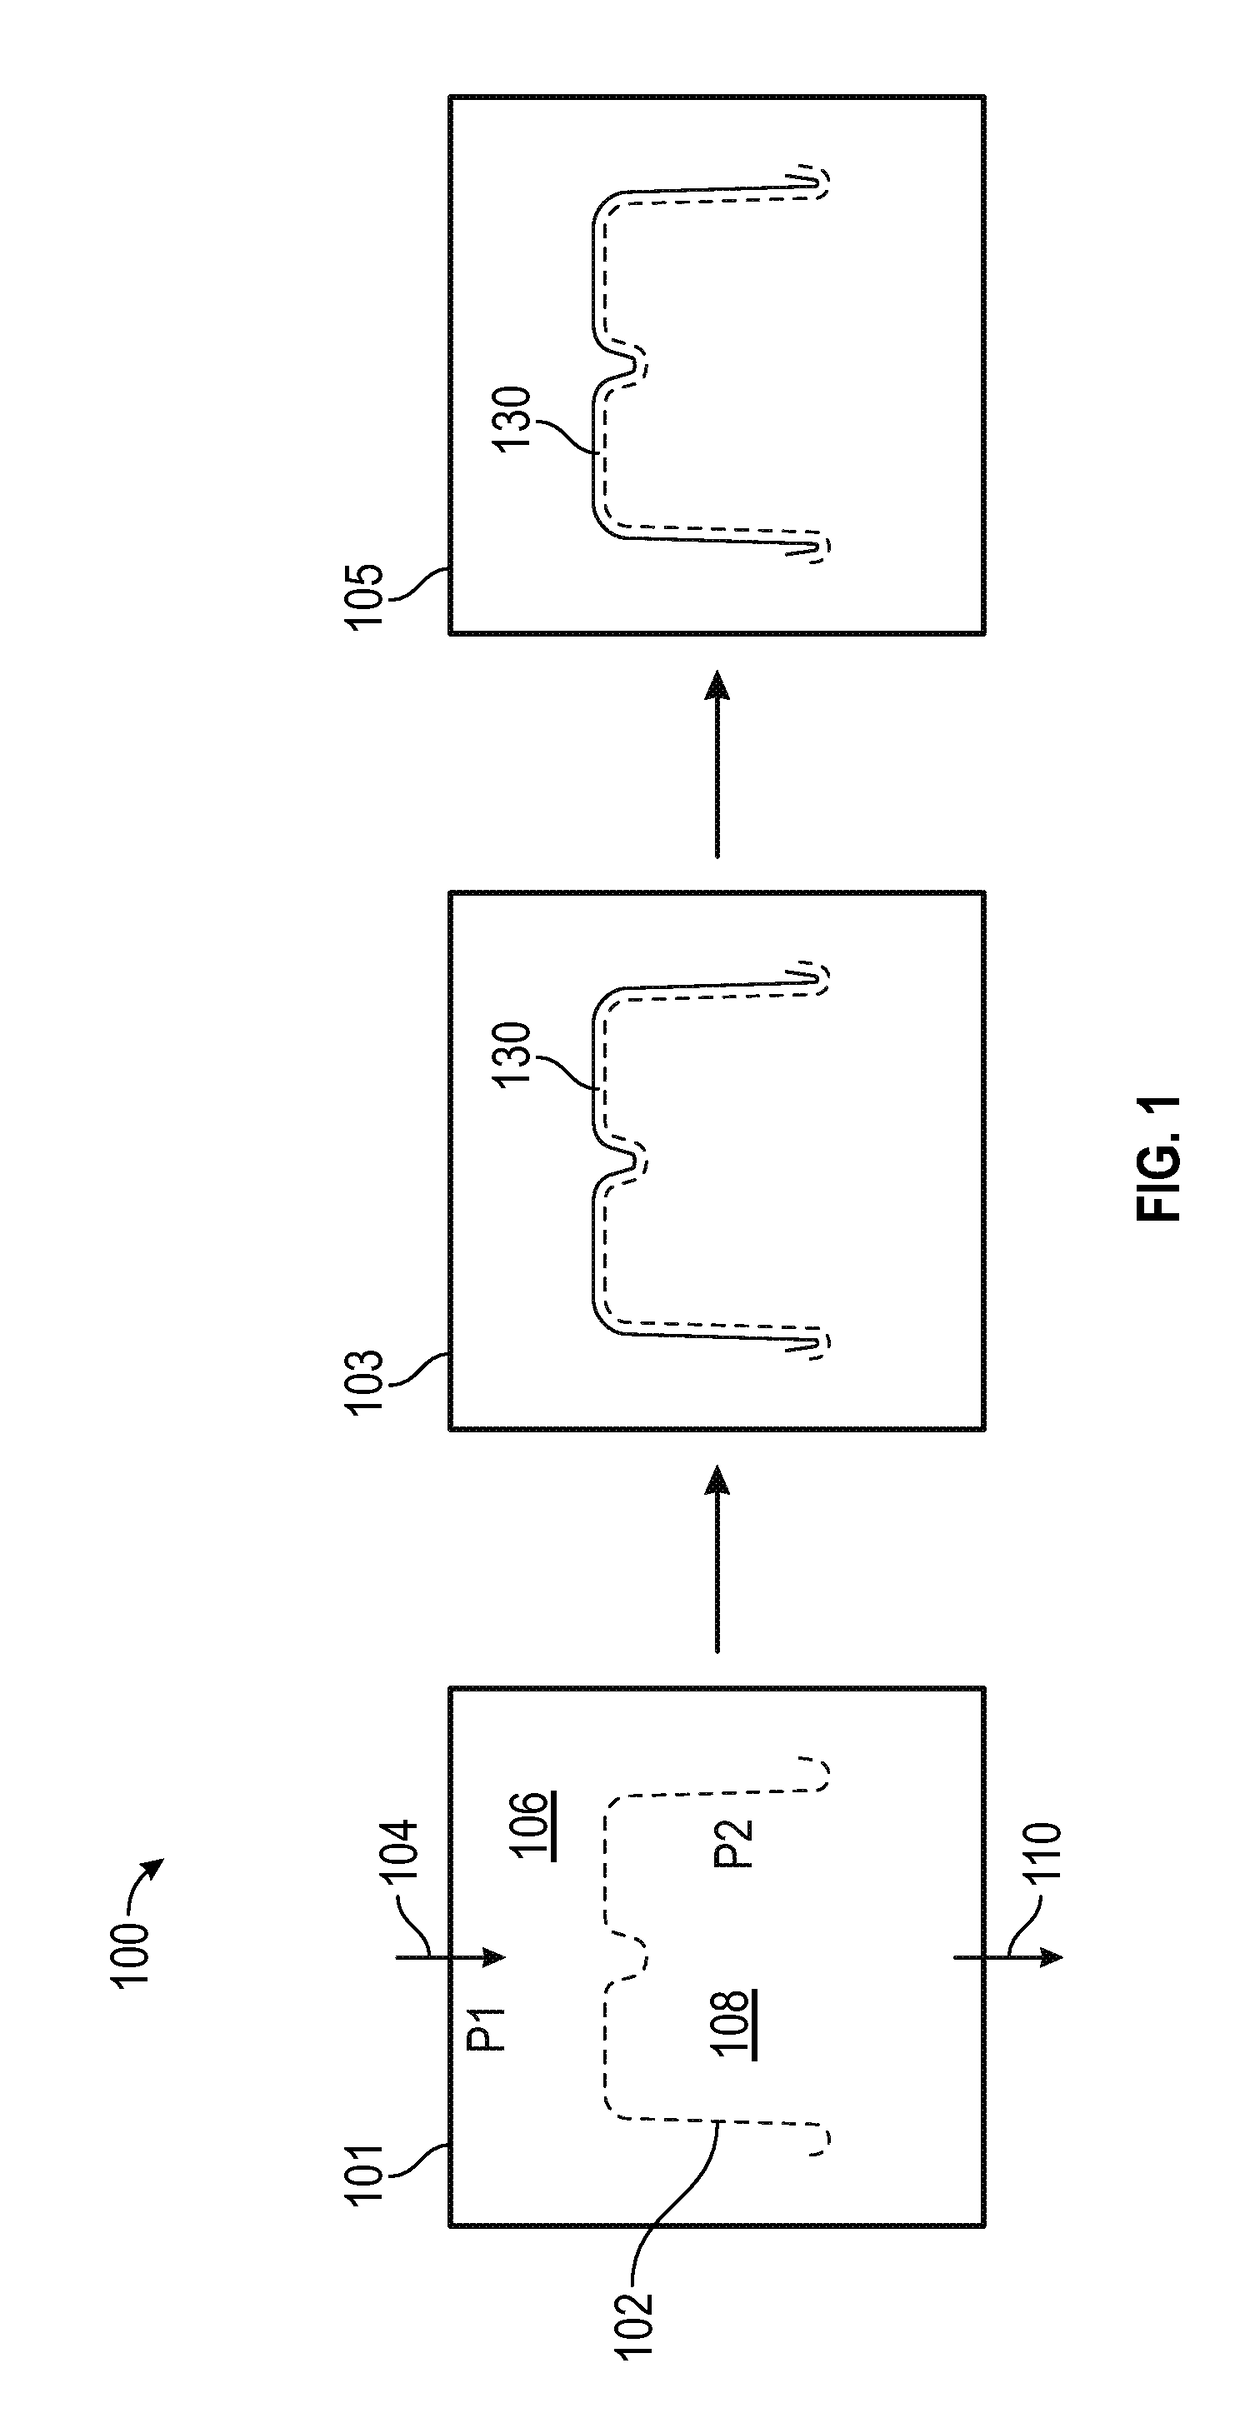 Methods and apparatus for manufacturing fiber-based, foldable packaging assemblies